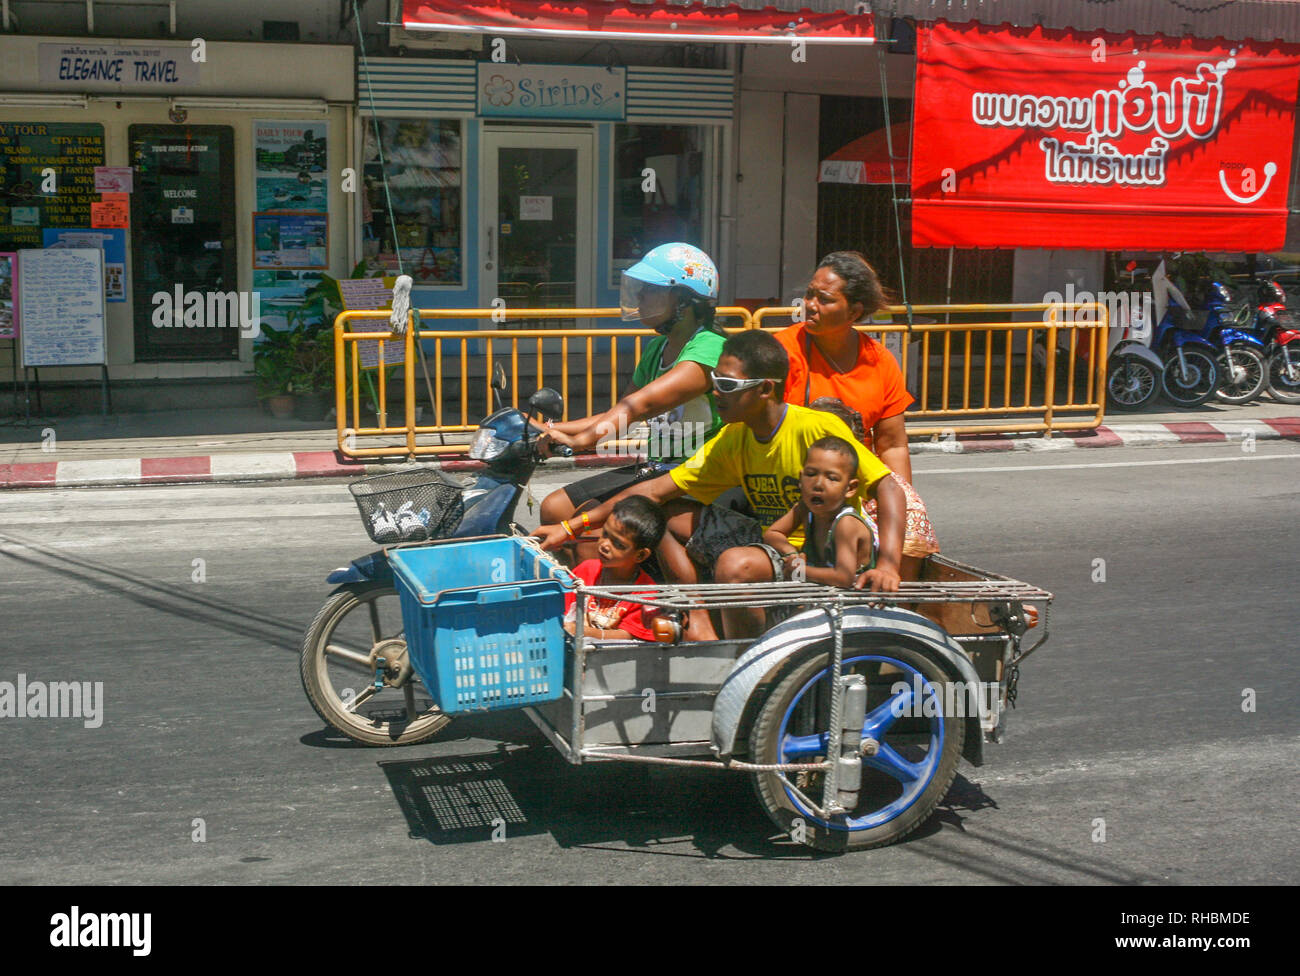 A family in a motorbike with side car, Phuket, Thailand Stock Photo